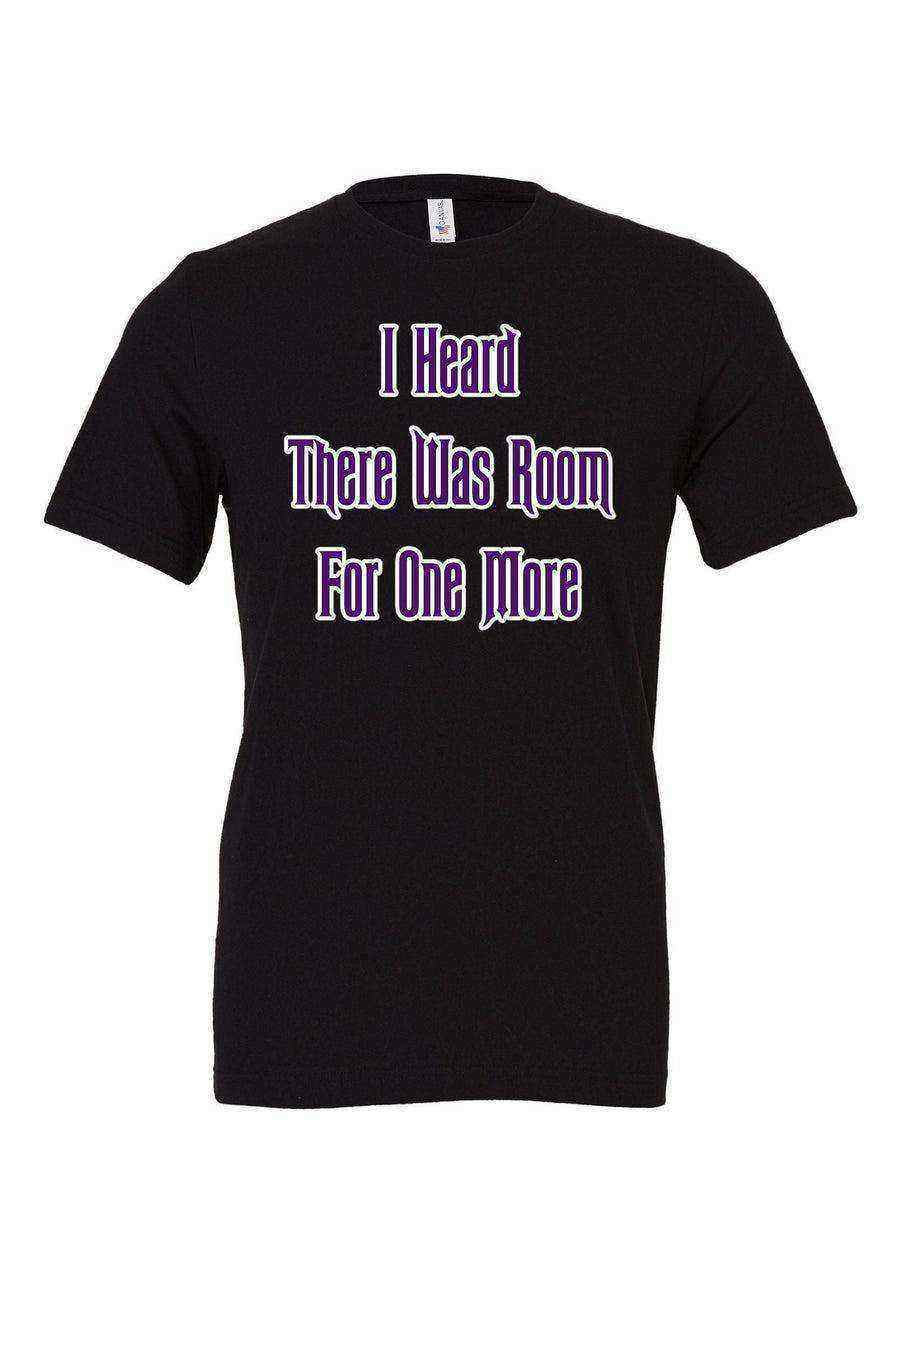 Haunted Mansion Shirt | Room For One More Shirt | Hitchhiking Ghosts Shirt - Dylan's Tees